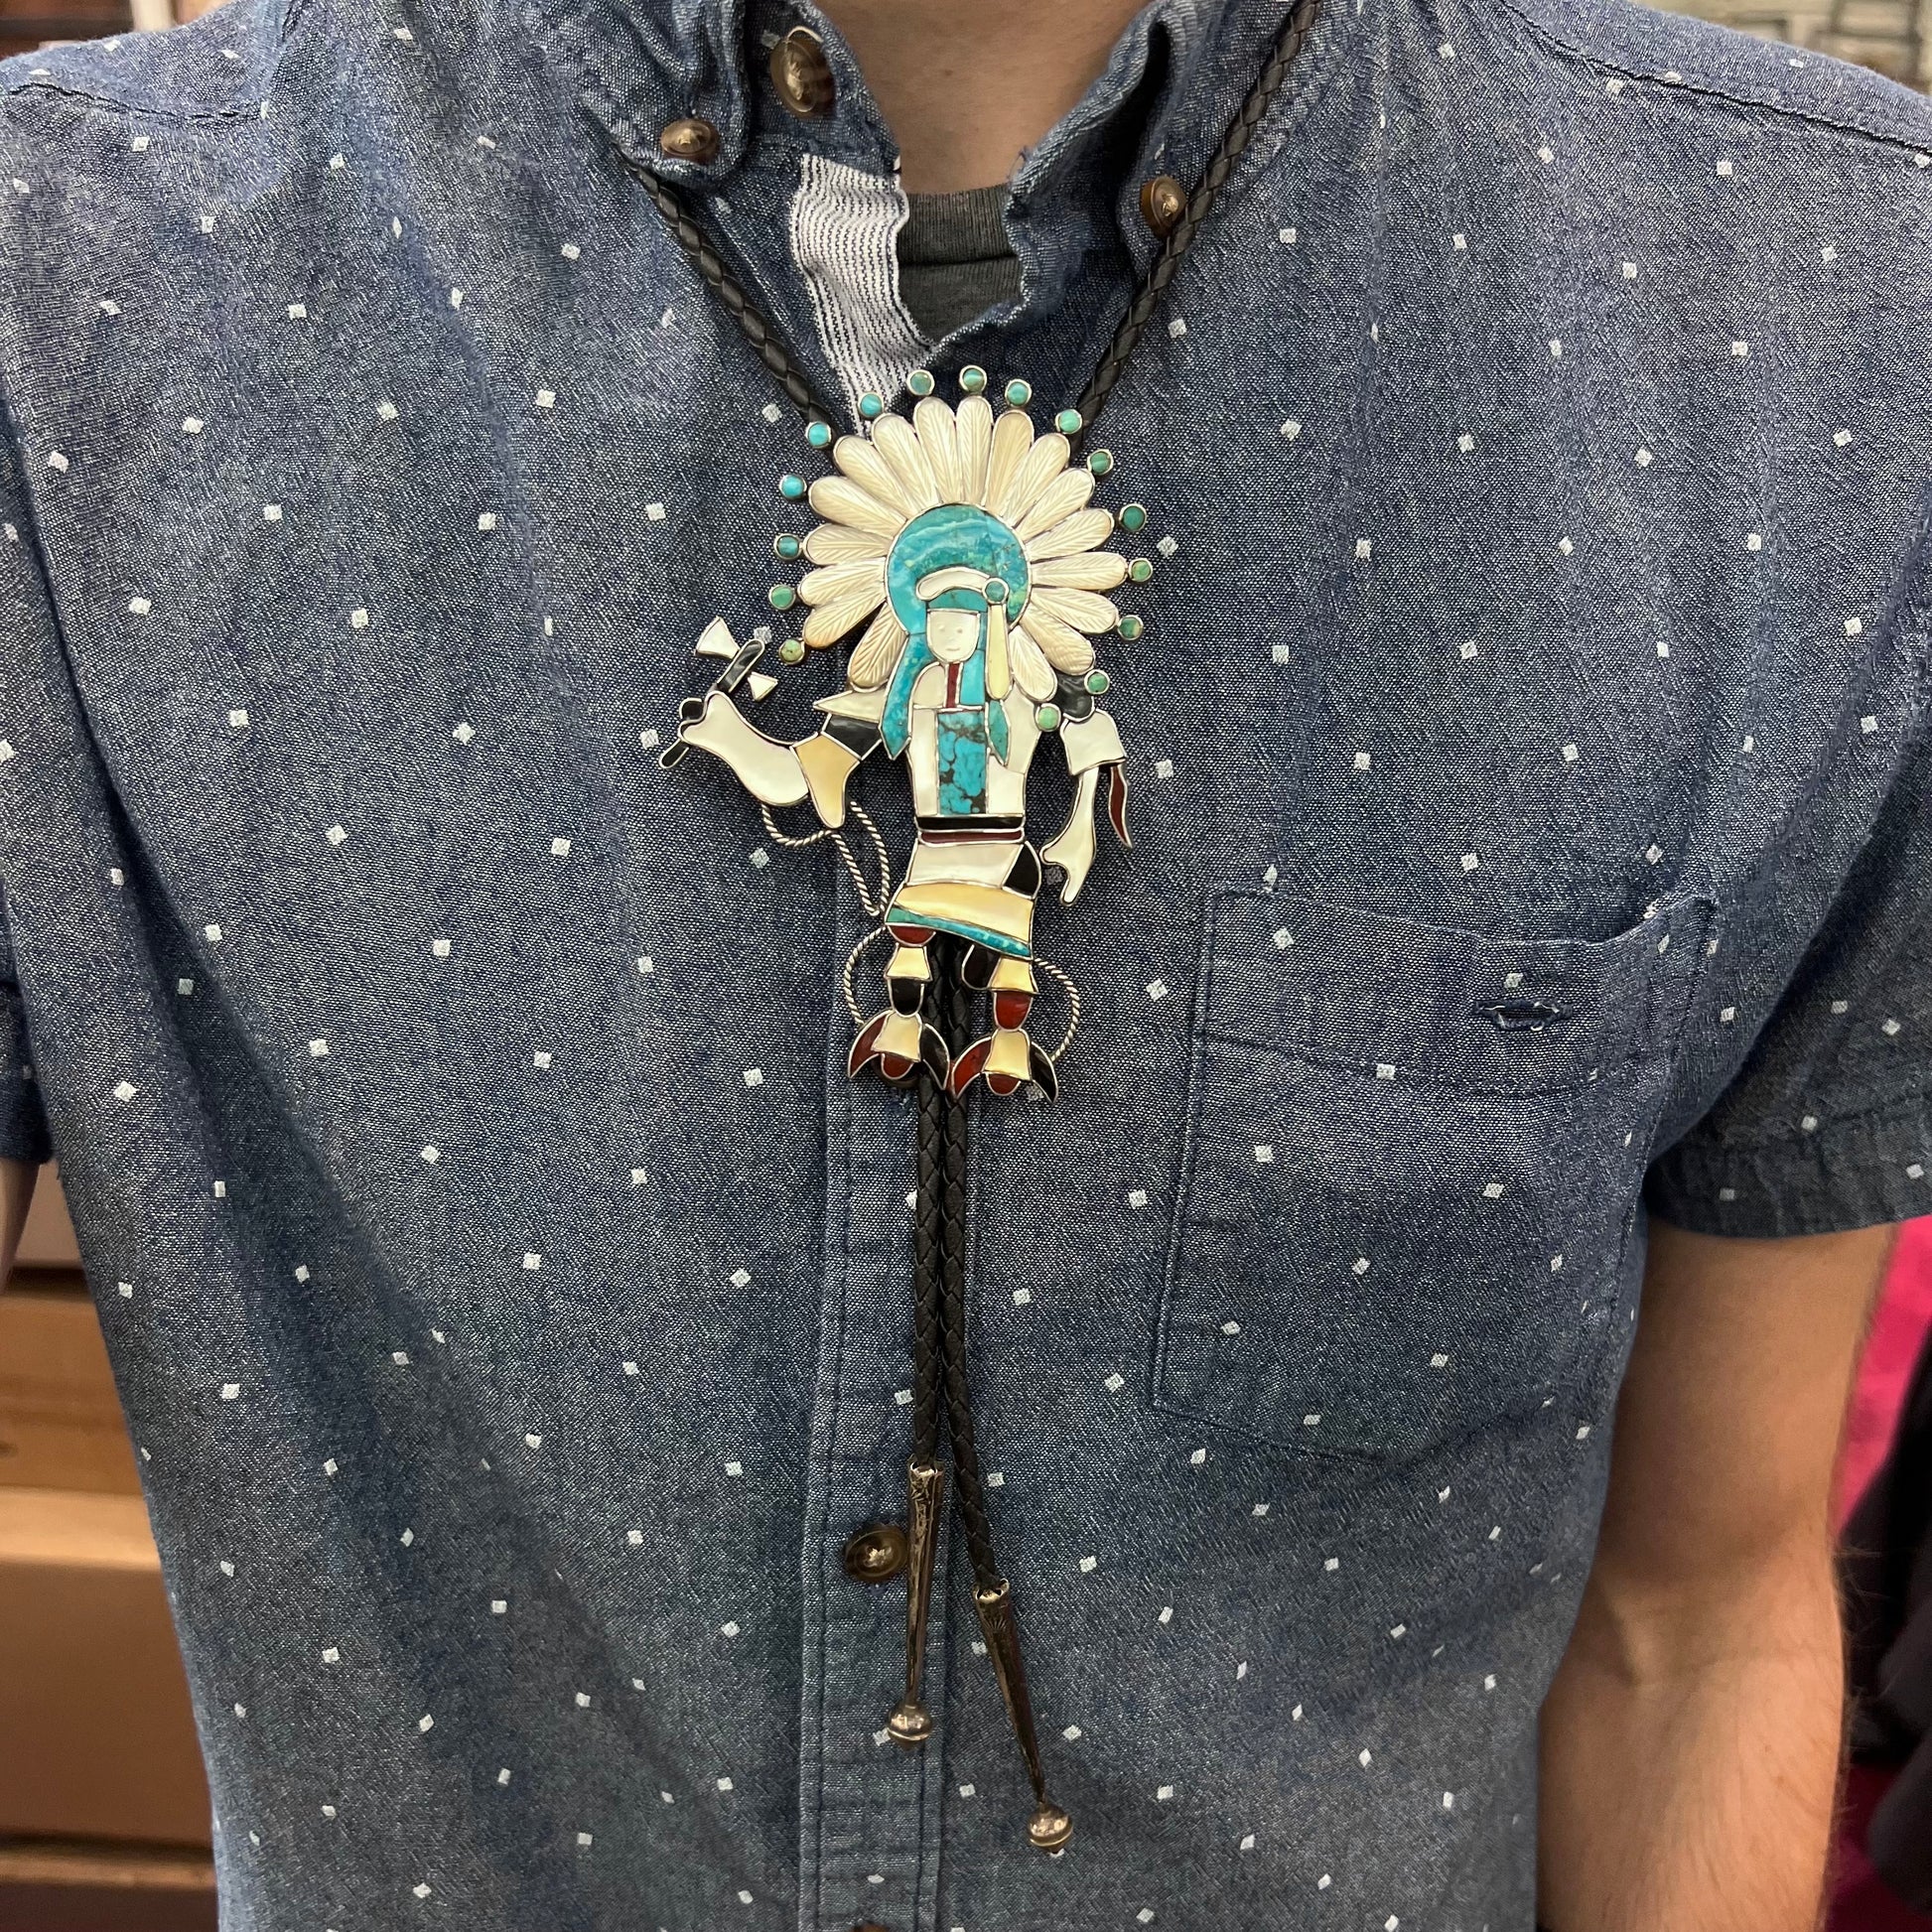 A Zuni Indian-made bolo tie featuring the motif of a kachina, inlaid with natural turquoise, mother of pearl, jet, and jasper stones.